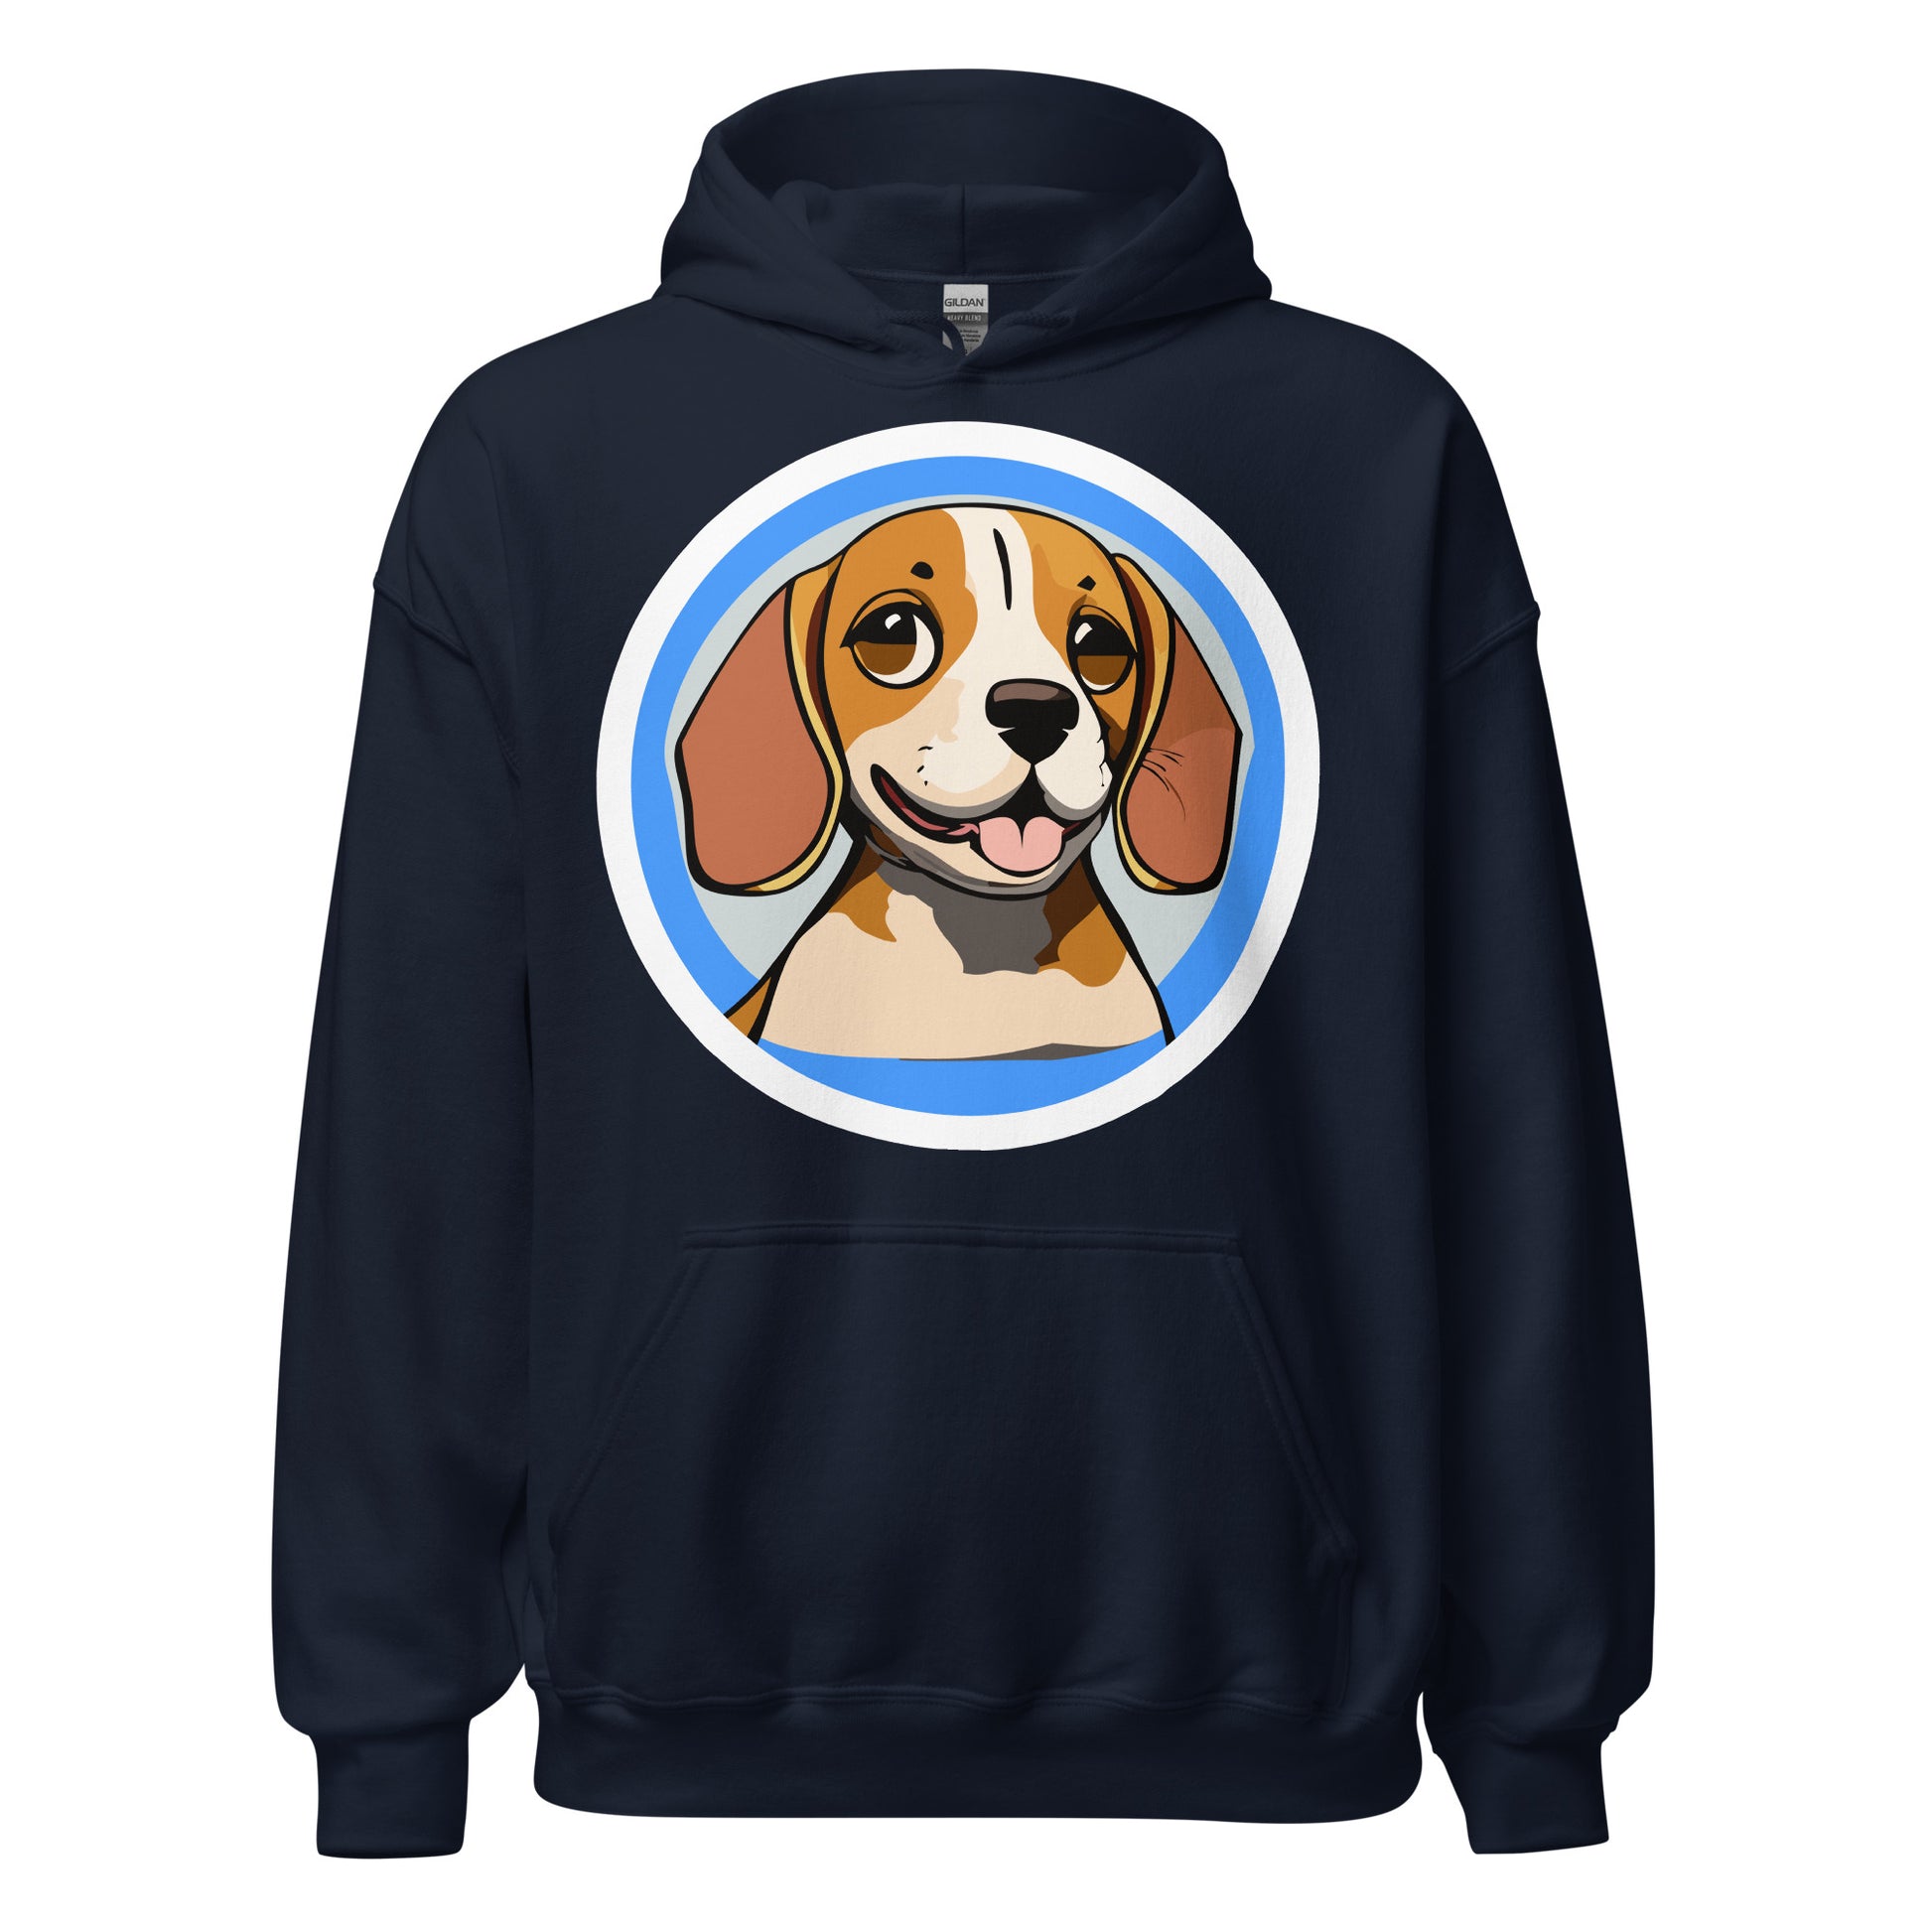 Comfy unisex hoodie for him or her with a cute beagle image, in navy